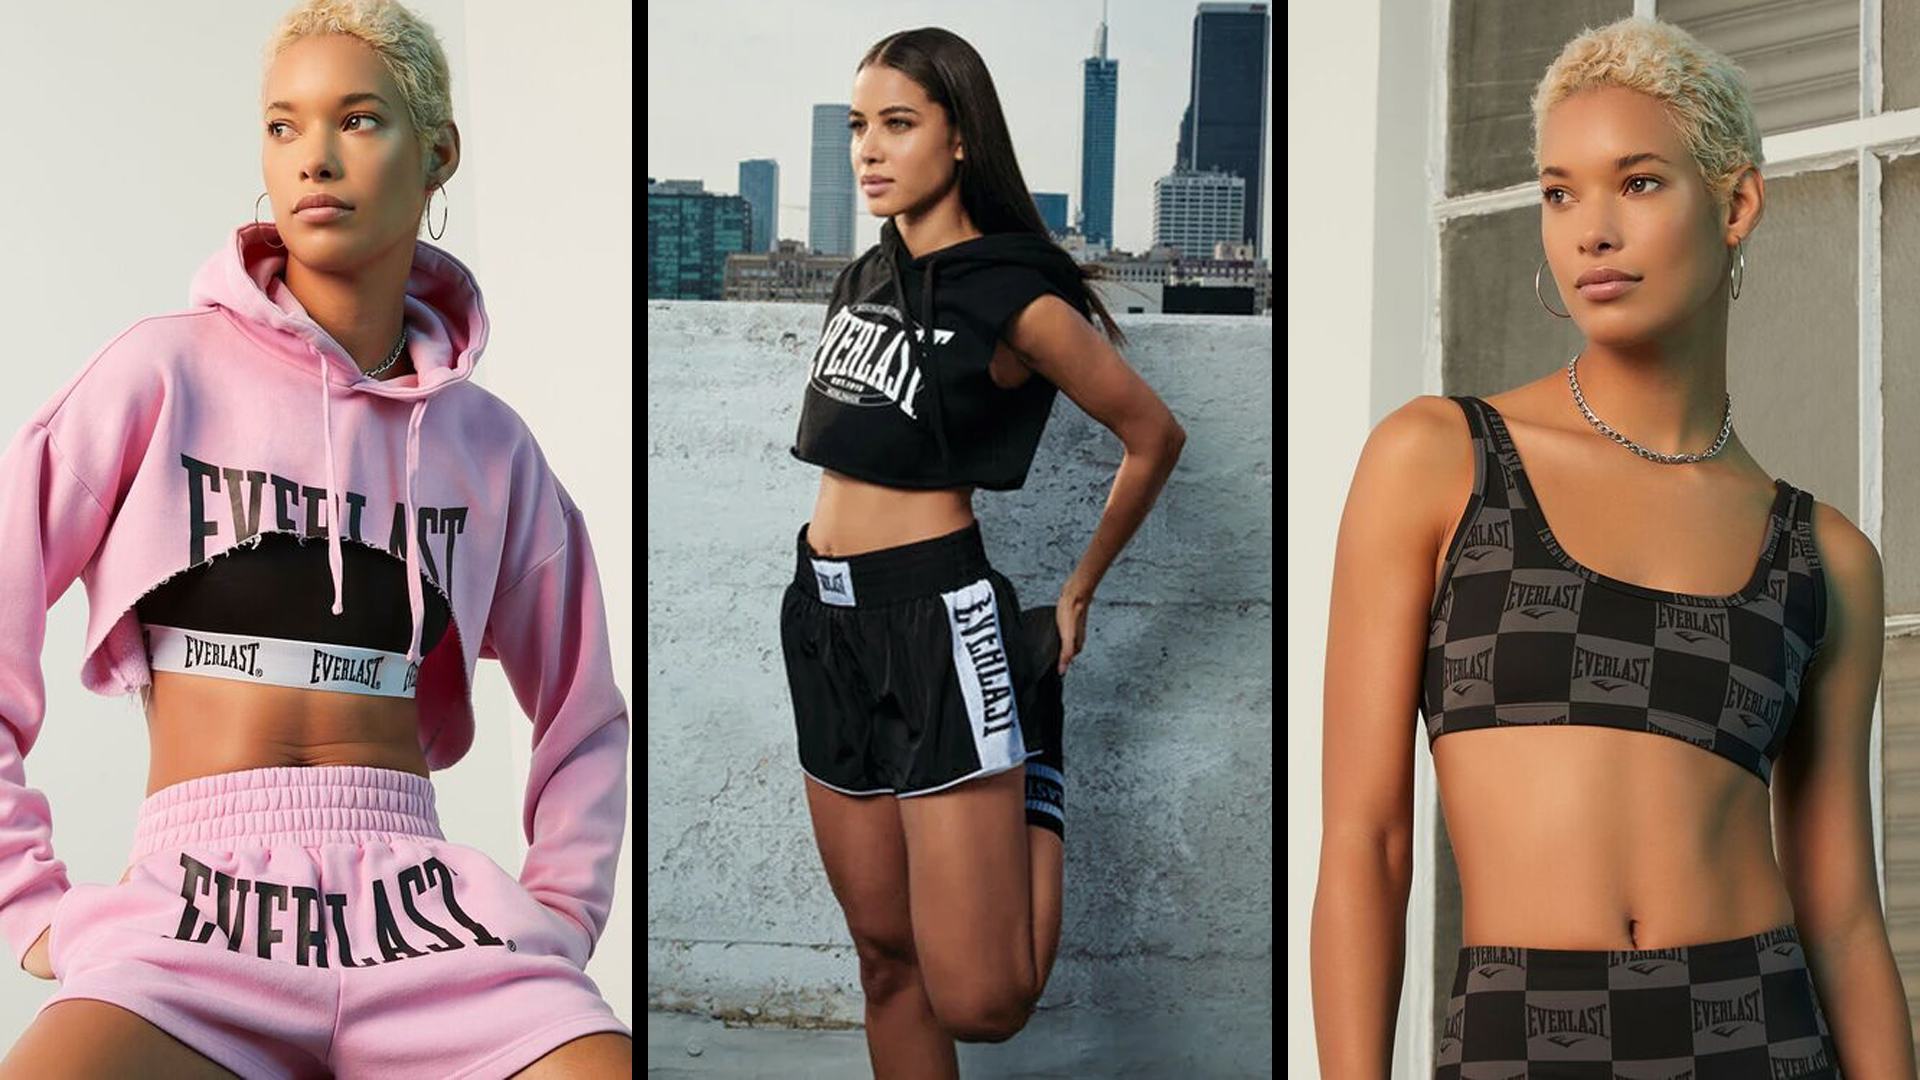 Forever 21 And Everlast Have Teamed Up For An Exclusive Collection -  21Ninety